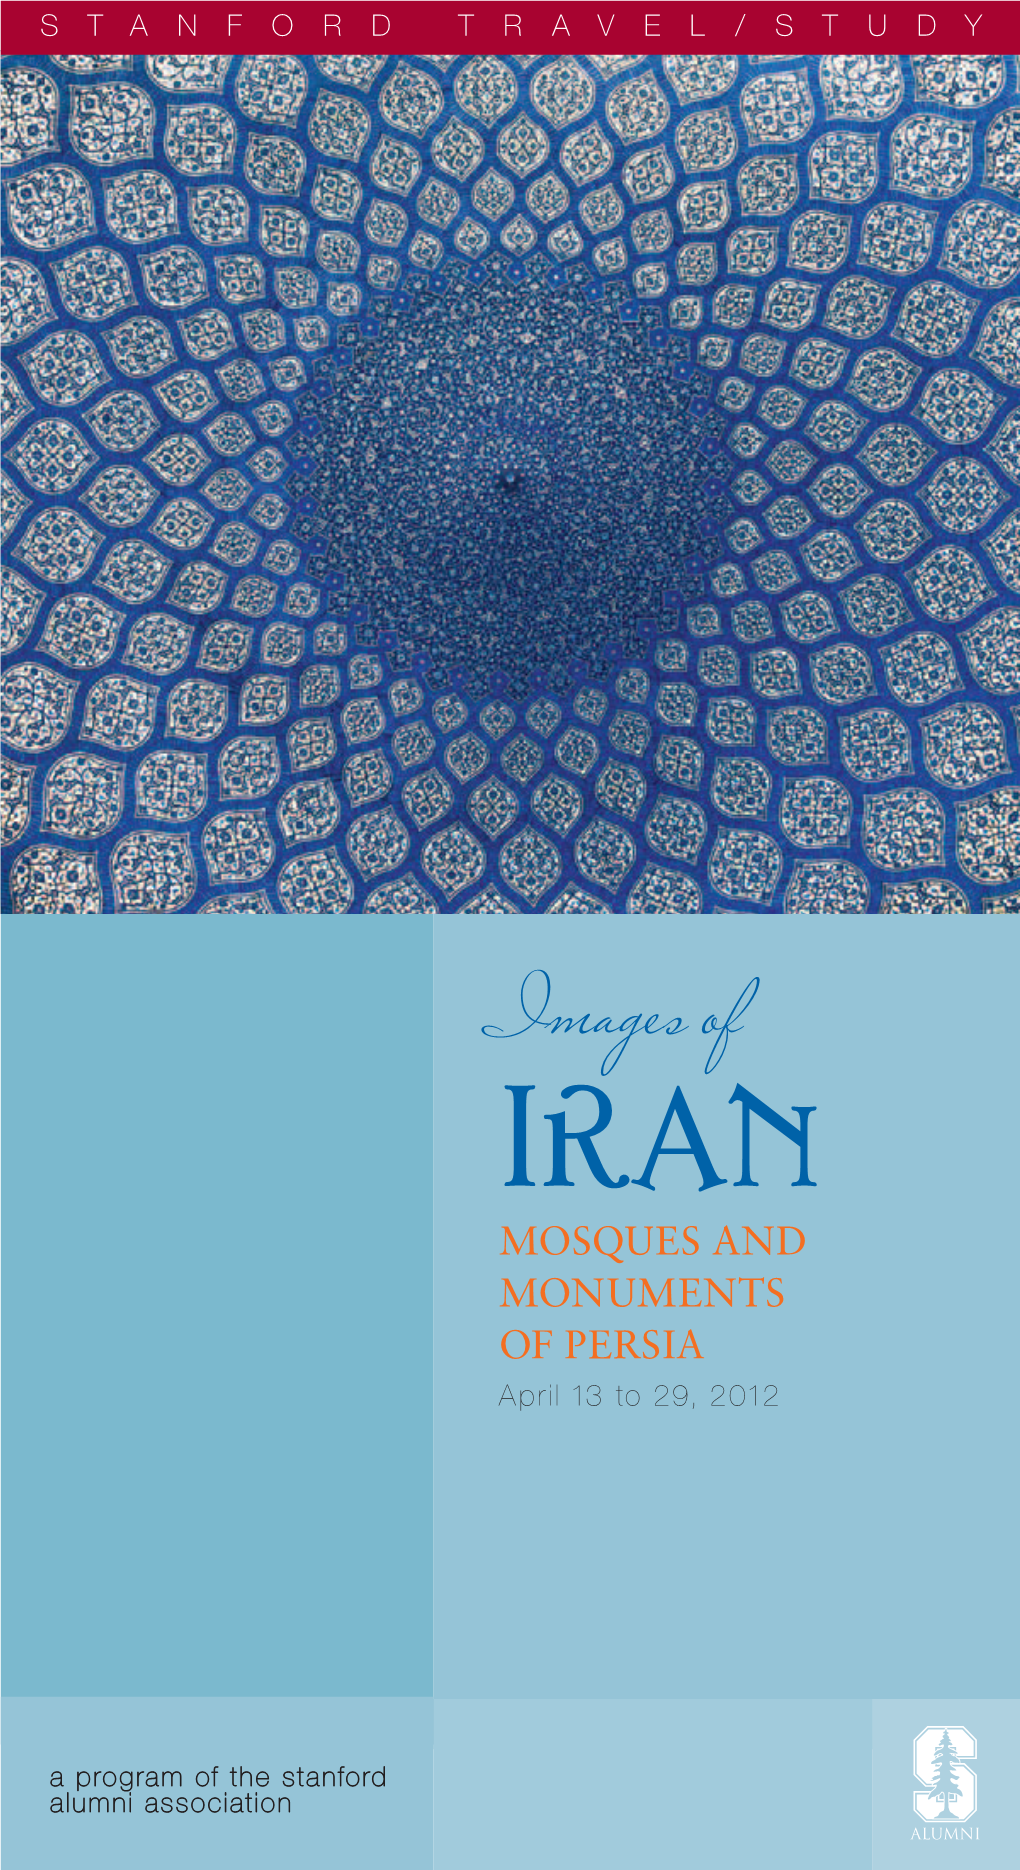 Images of IRAN Mosques and Monuments of Persia April 13 to 29, 2012